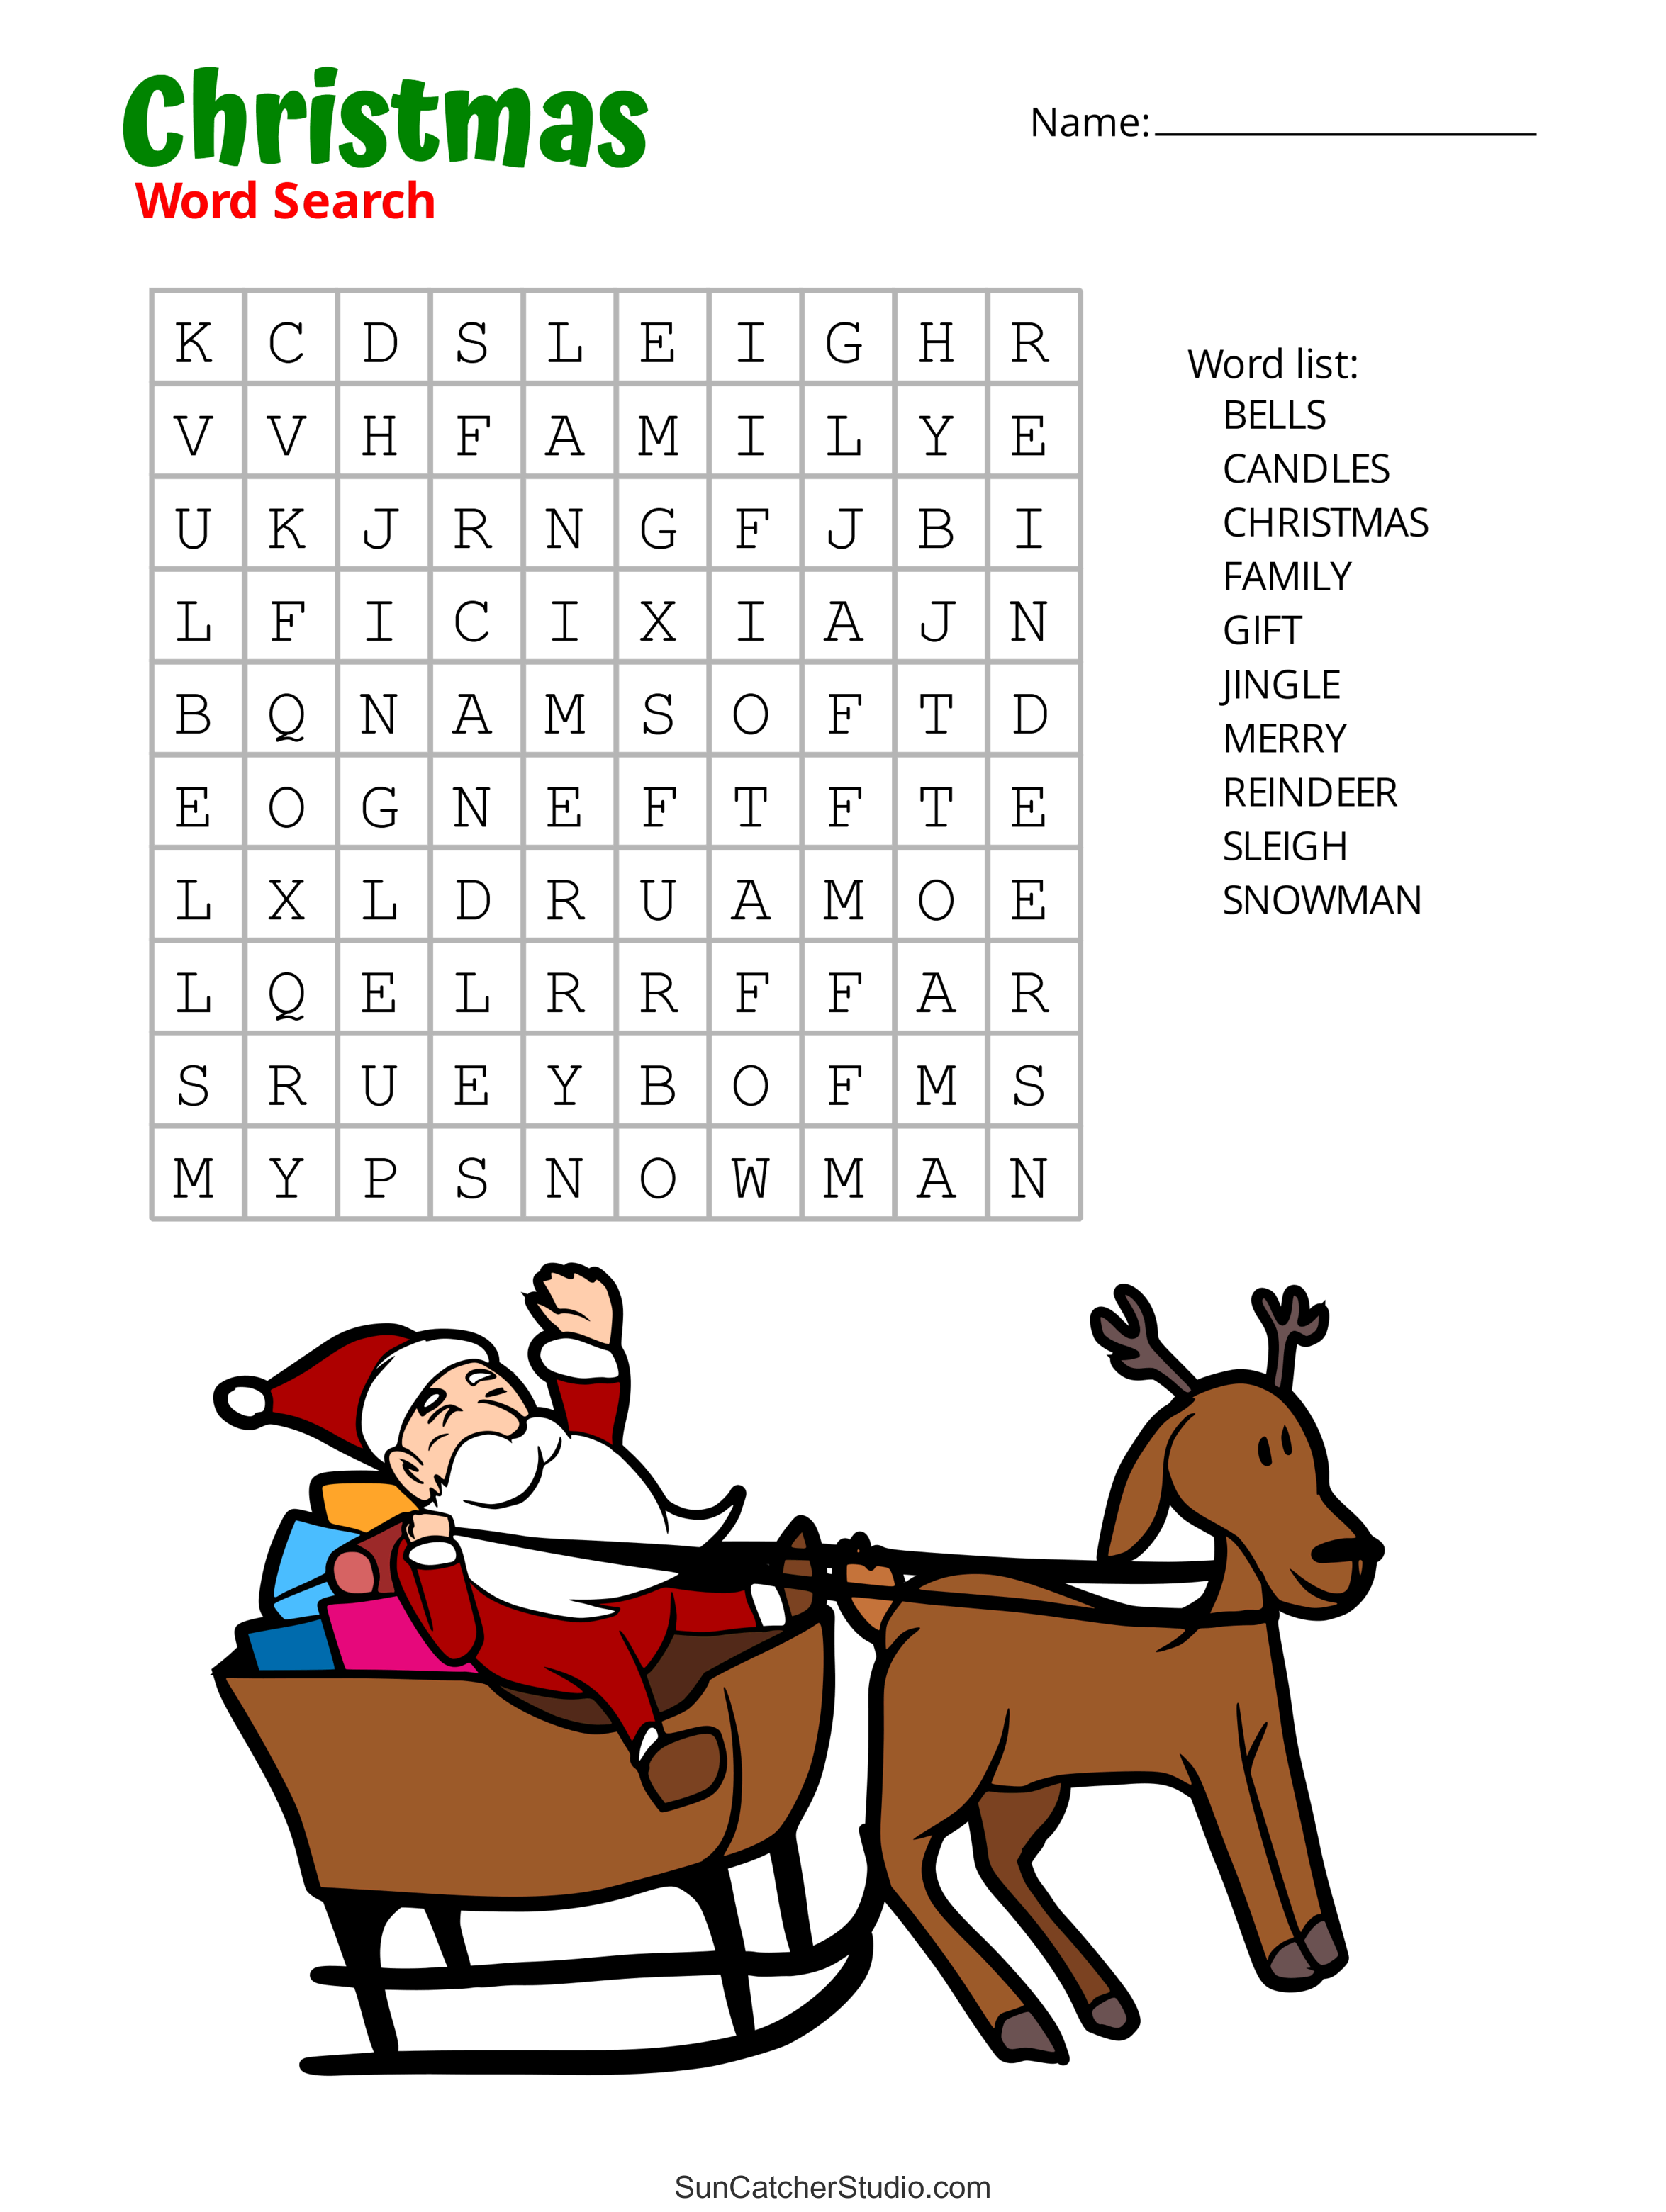 christmas-word-search-free-printable-pdf-puzzles-diy-projects-patterns-monograms-designs